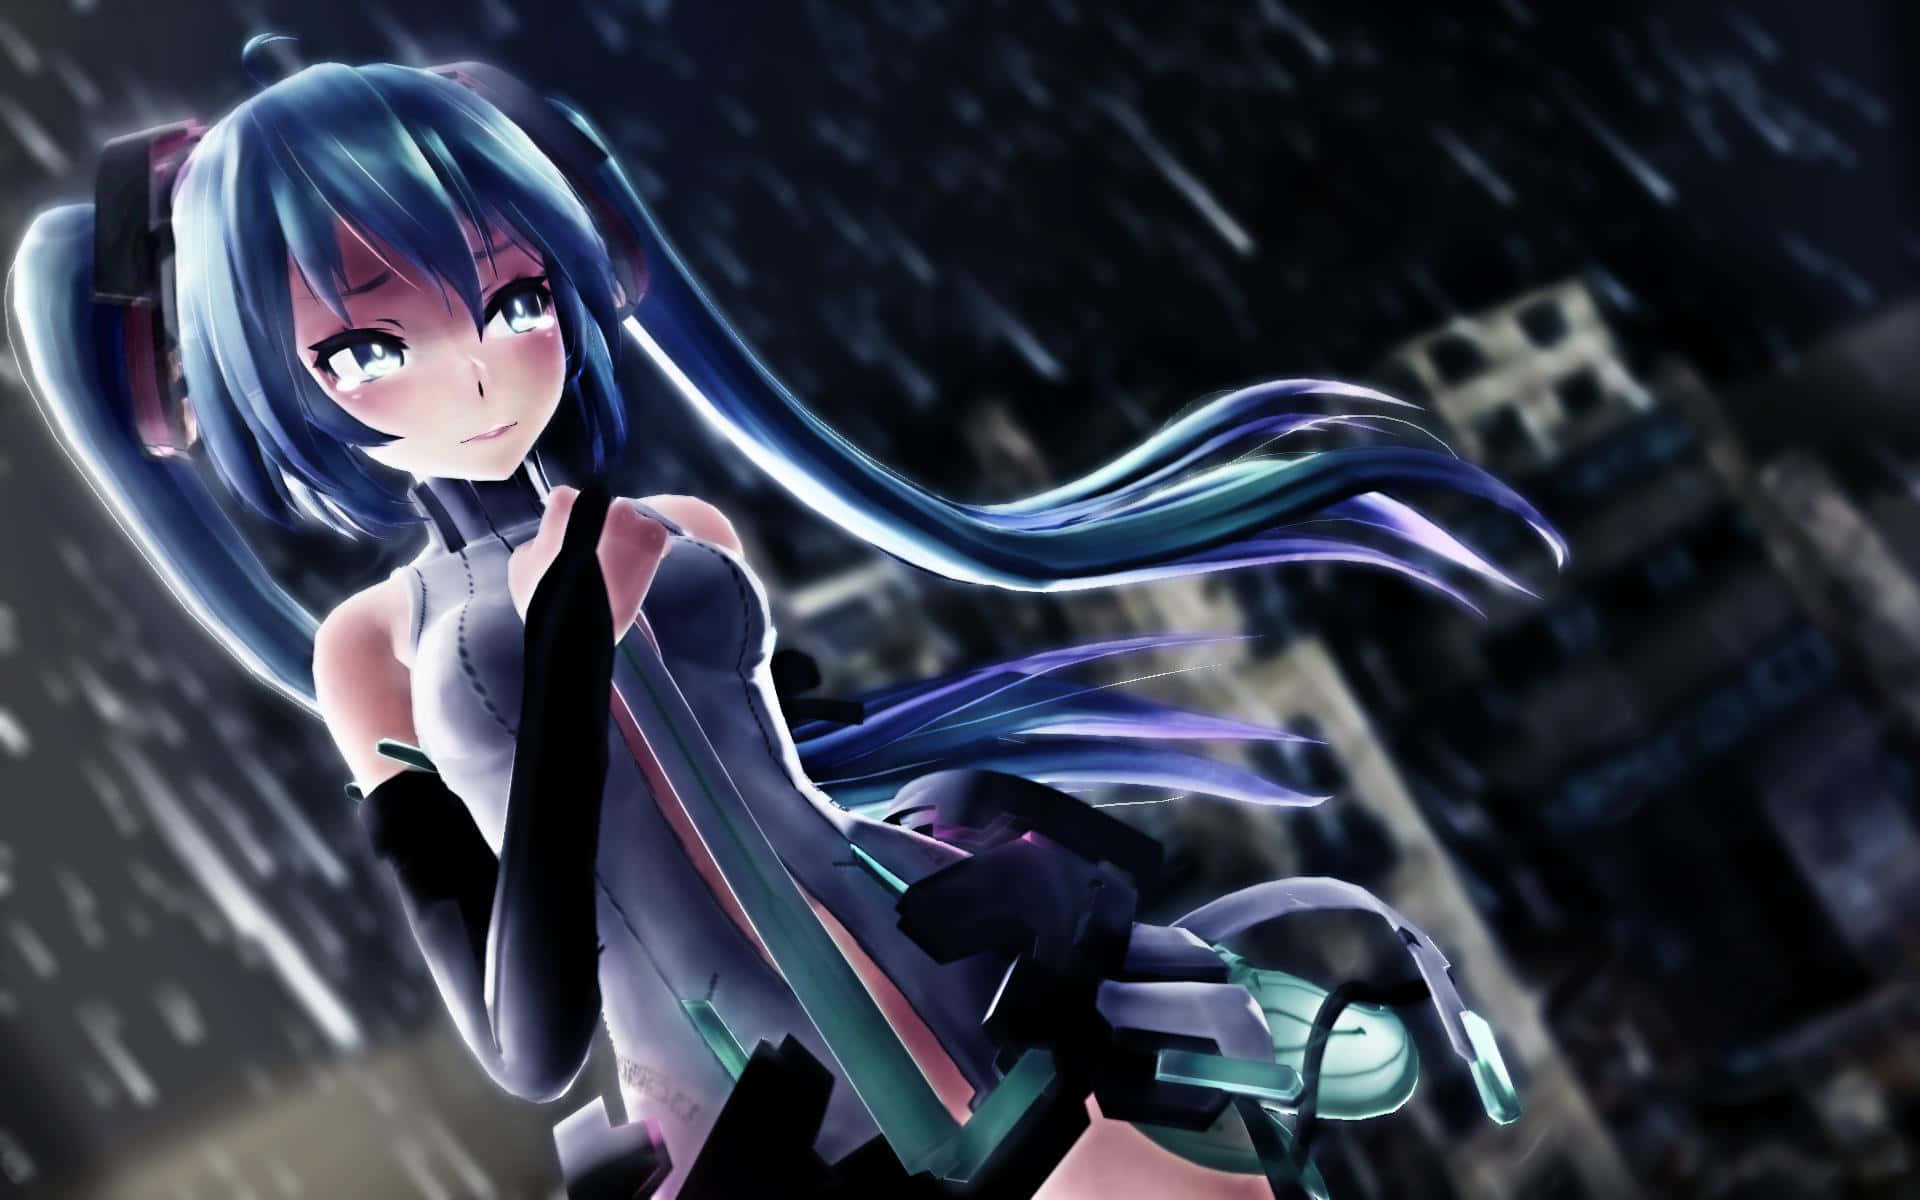 Hatsune Miku Transported to Another Dimension